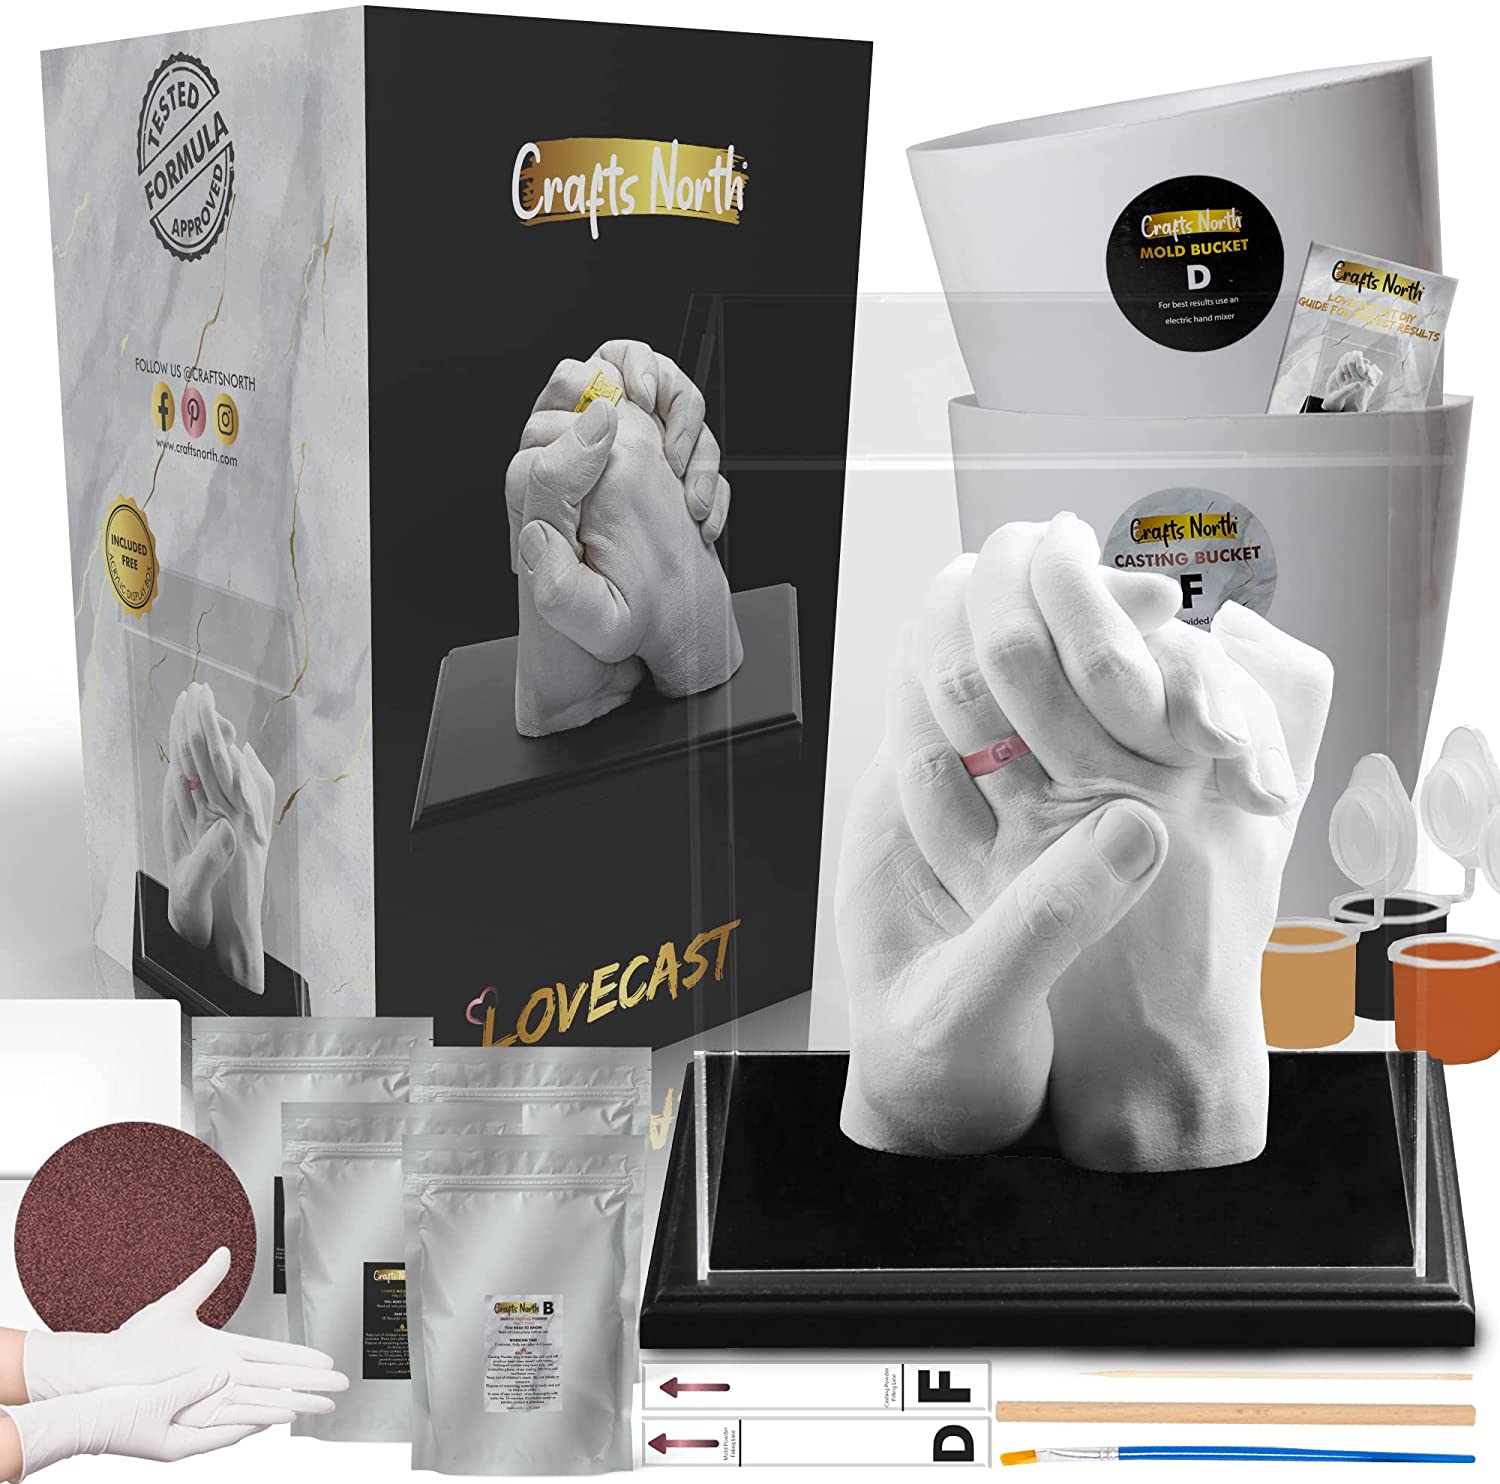 CraftsNorth Hand Casting DIY Kit for Couples | Complete Kit with Acrylic Display, Wooden Base, and Step-by-Step Guide to Create A Perfect Hand Molding